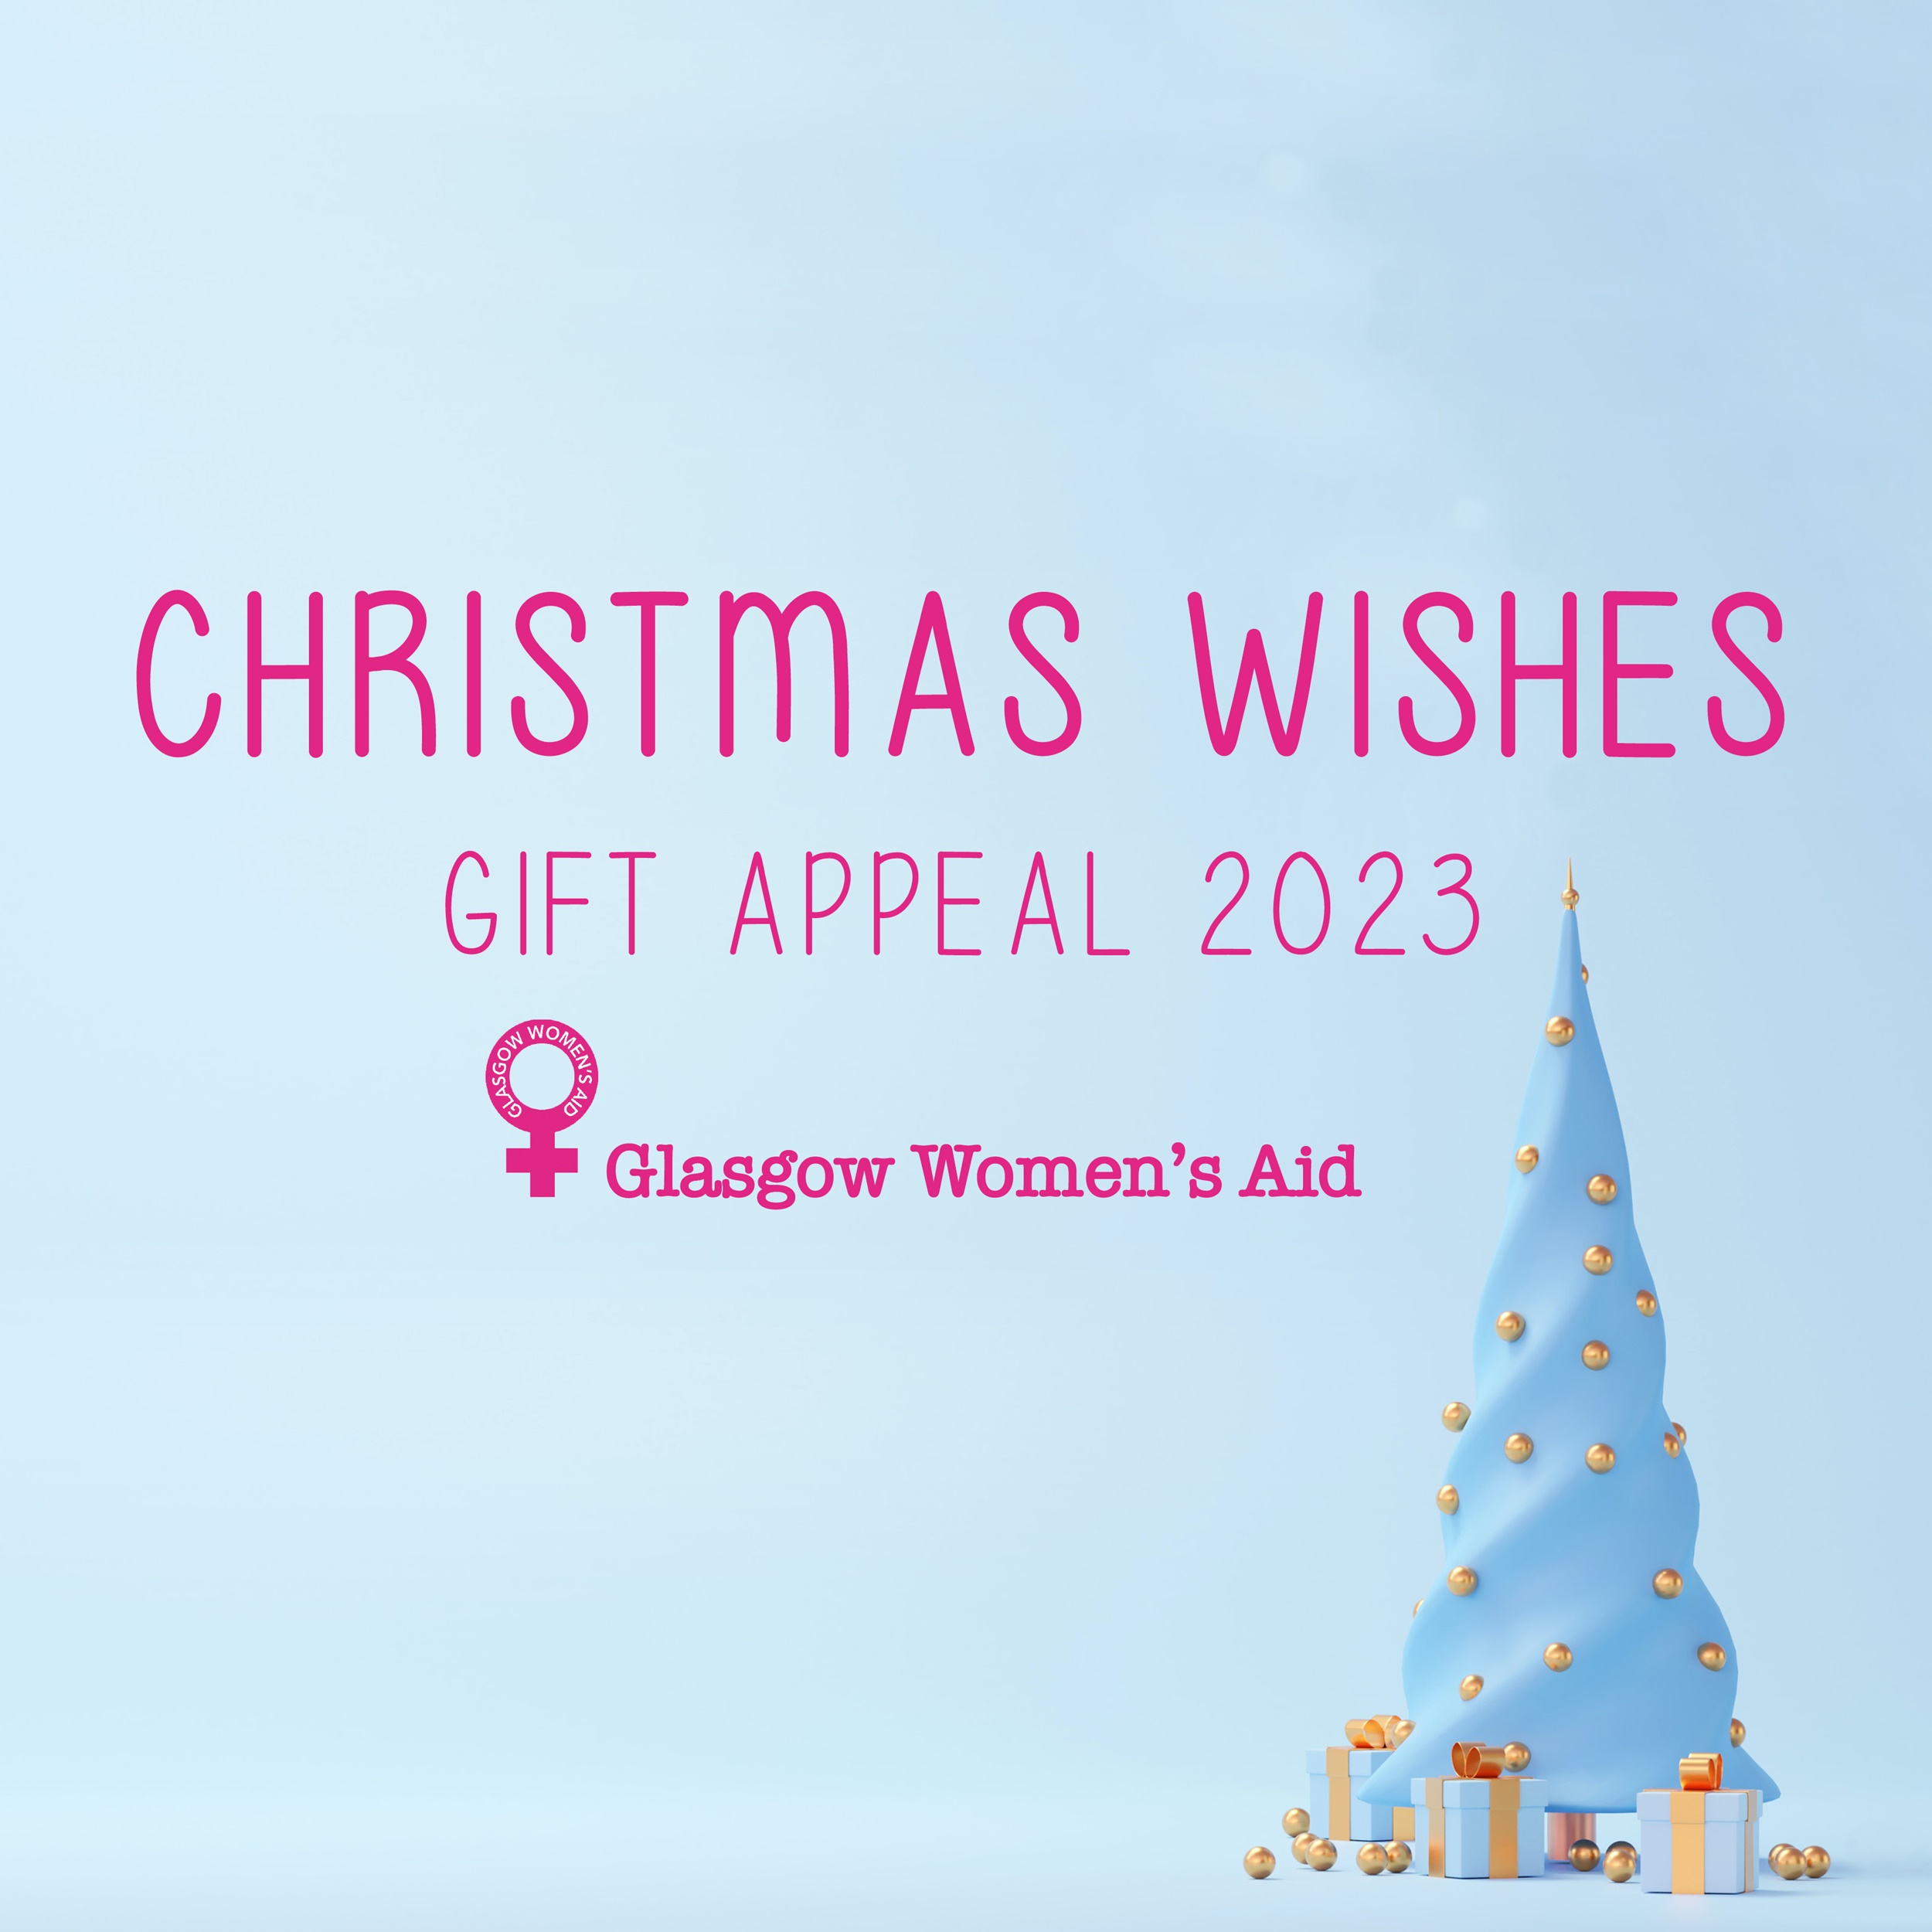 Christmas Appeal for Glasgow Women's Aid 2023